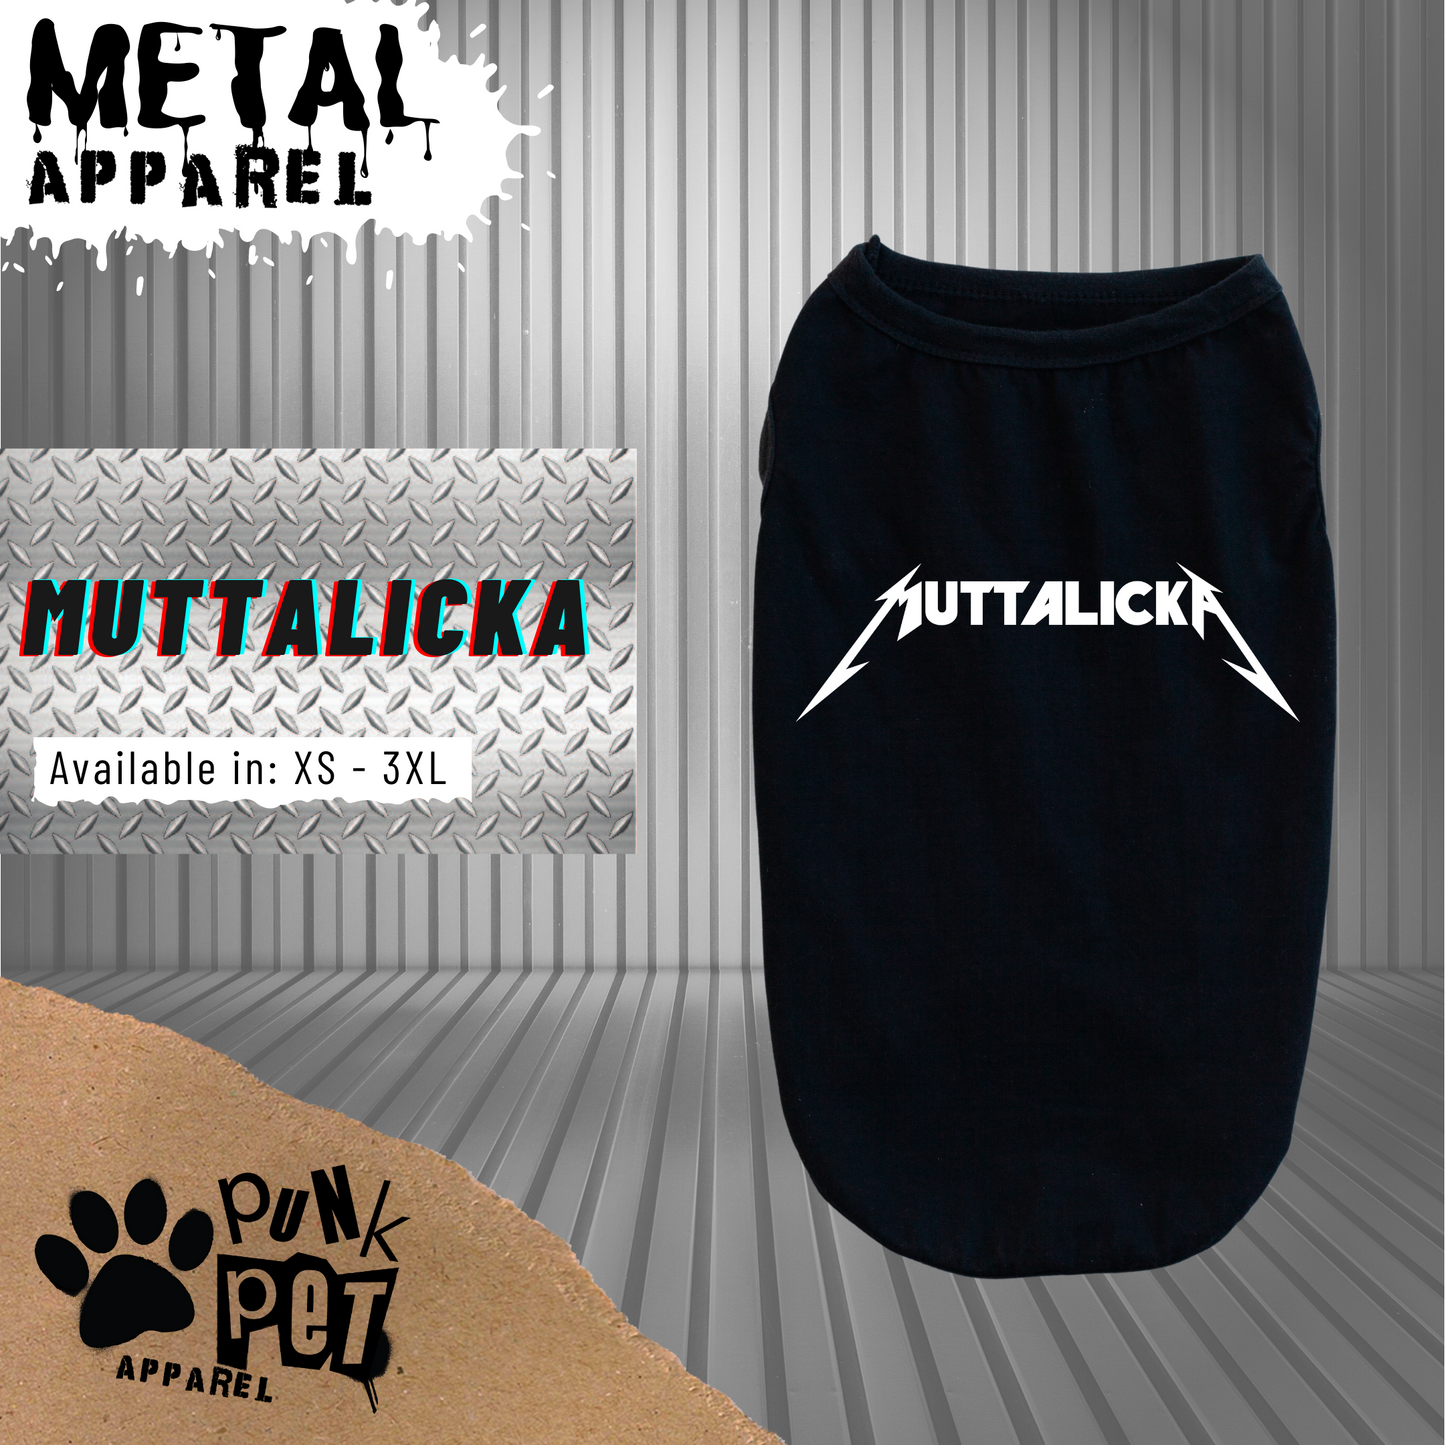 Muttalicka - Black Tee (Also available in White)